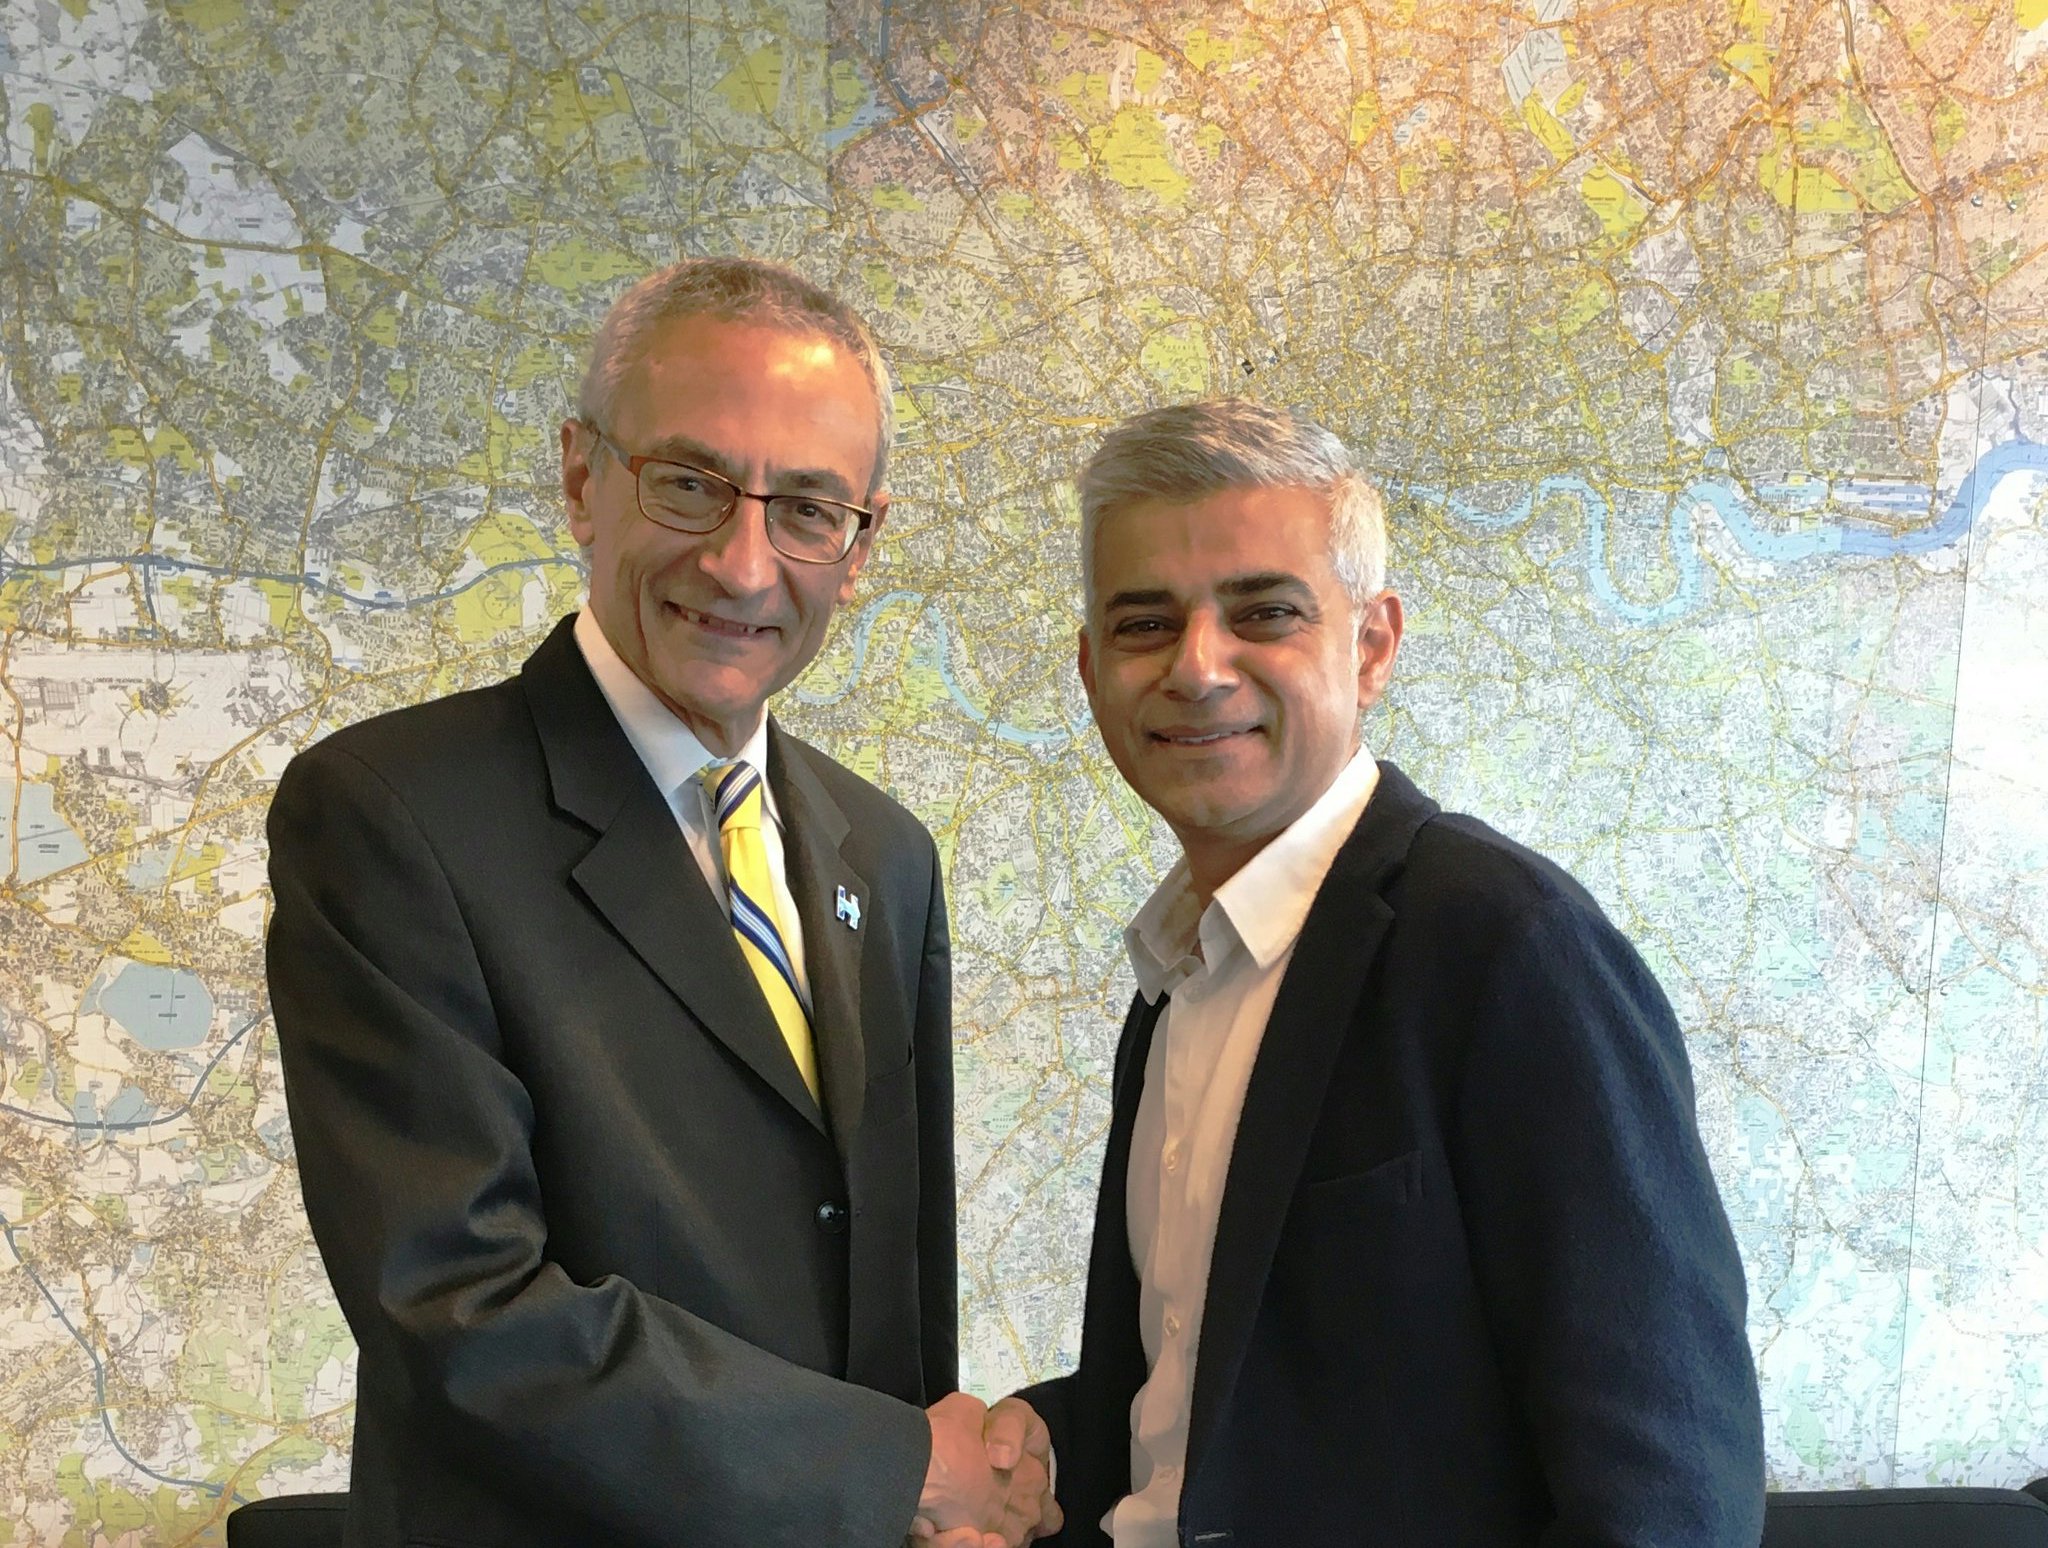 Sadiq Khan on Twitter: "Good to welcome @johnpodesta to London and discuss how #LondonIsOpen to US trade, investment & tourism.… "